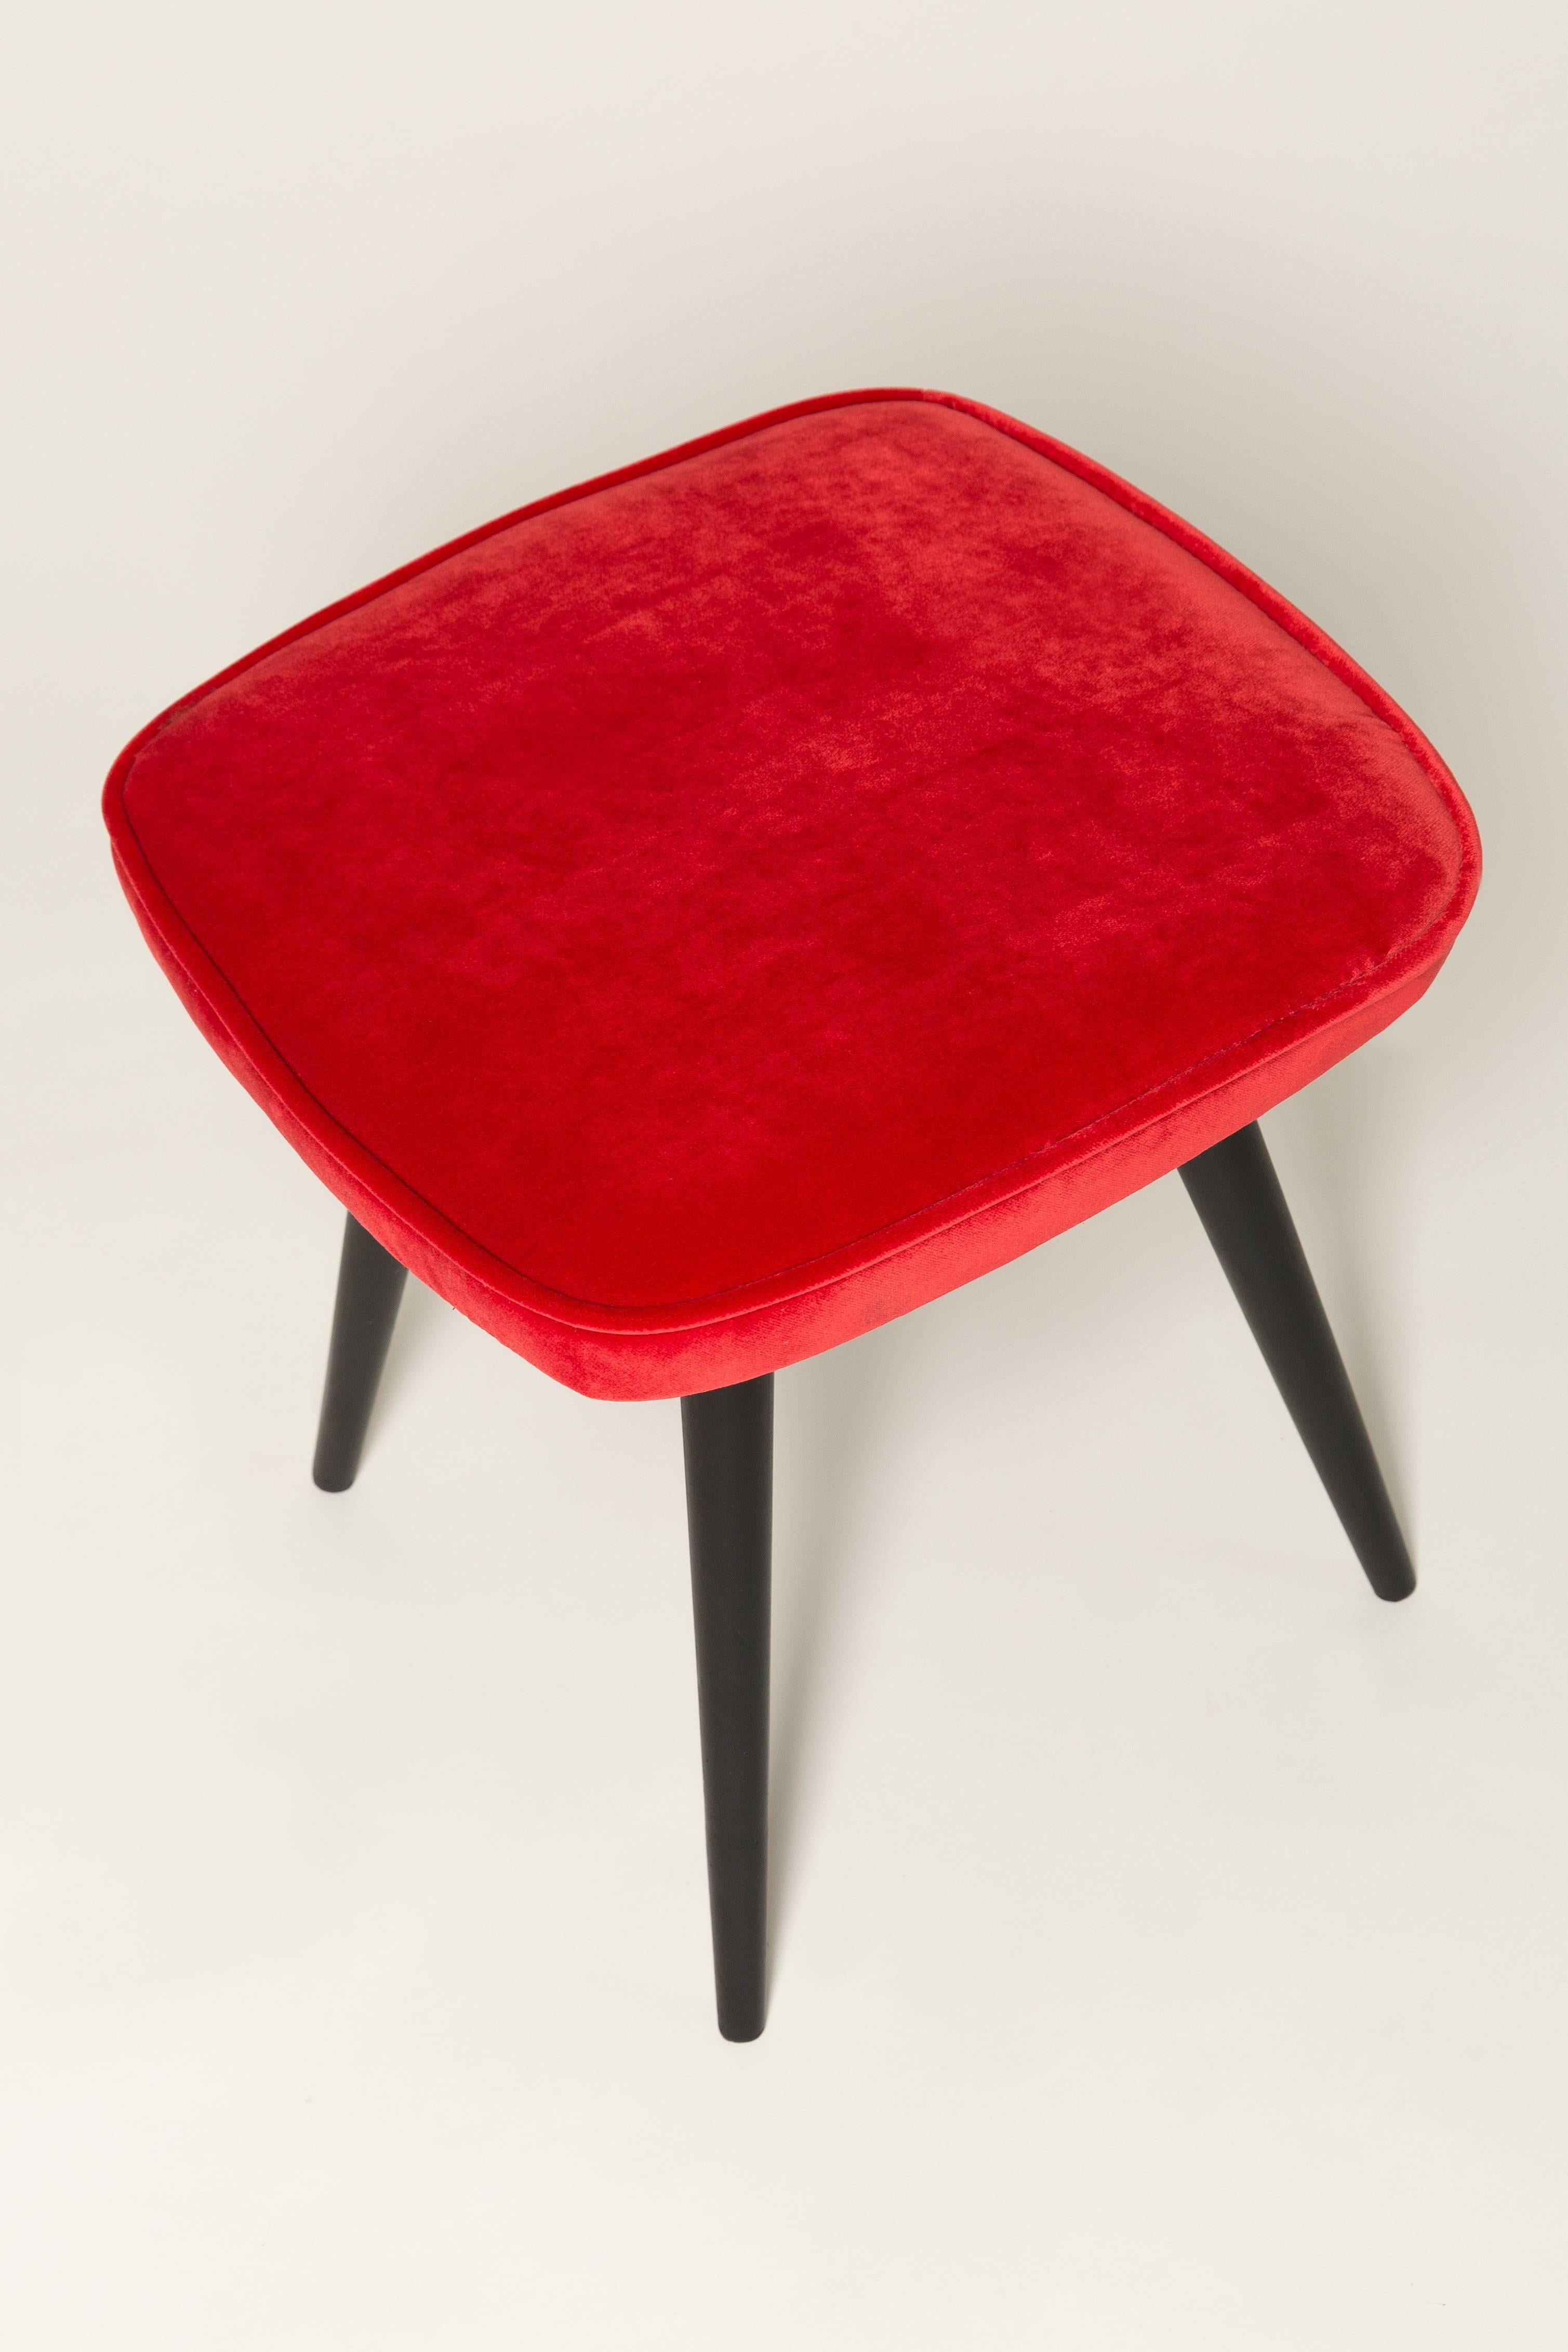 Stool from the turn of the 1960s and 1970s. Beautiful red velvet upholstery. The stool consists of an upholstered part, a seat and wooden legs narrowing downwards, characteristic of the 1960s style. We can prepare this pair also in another color of